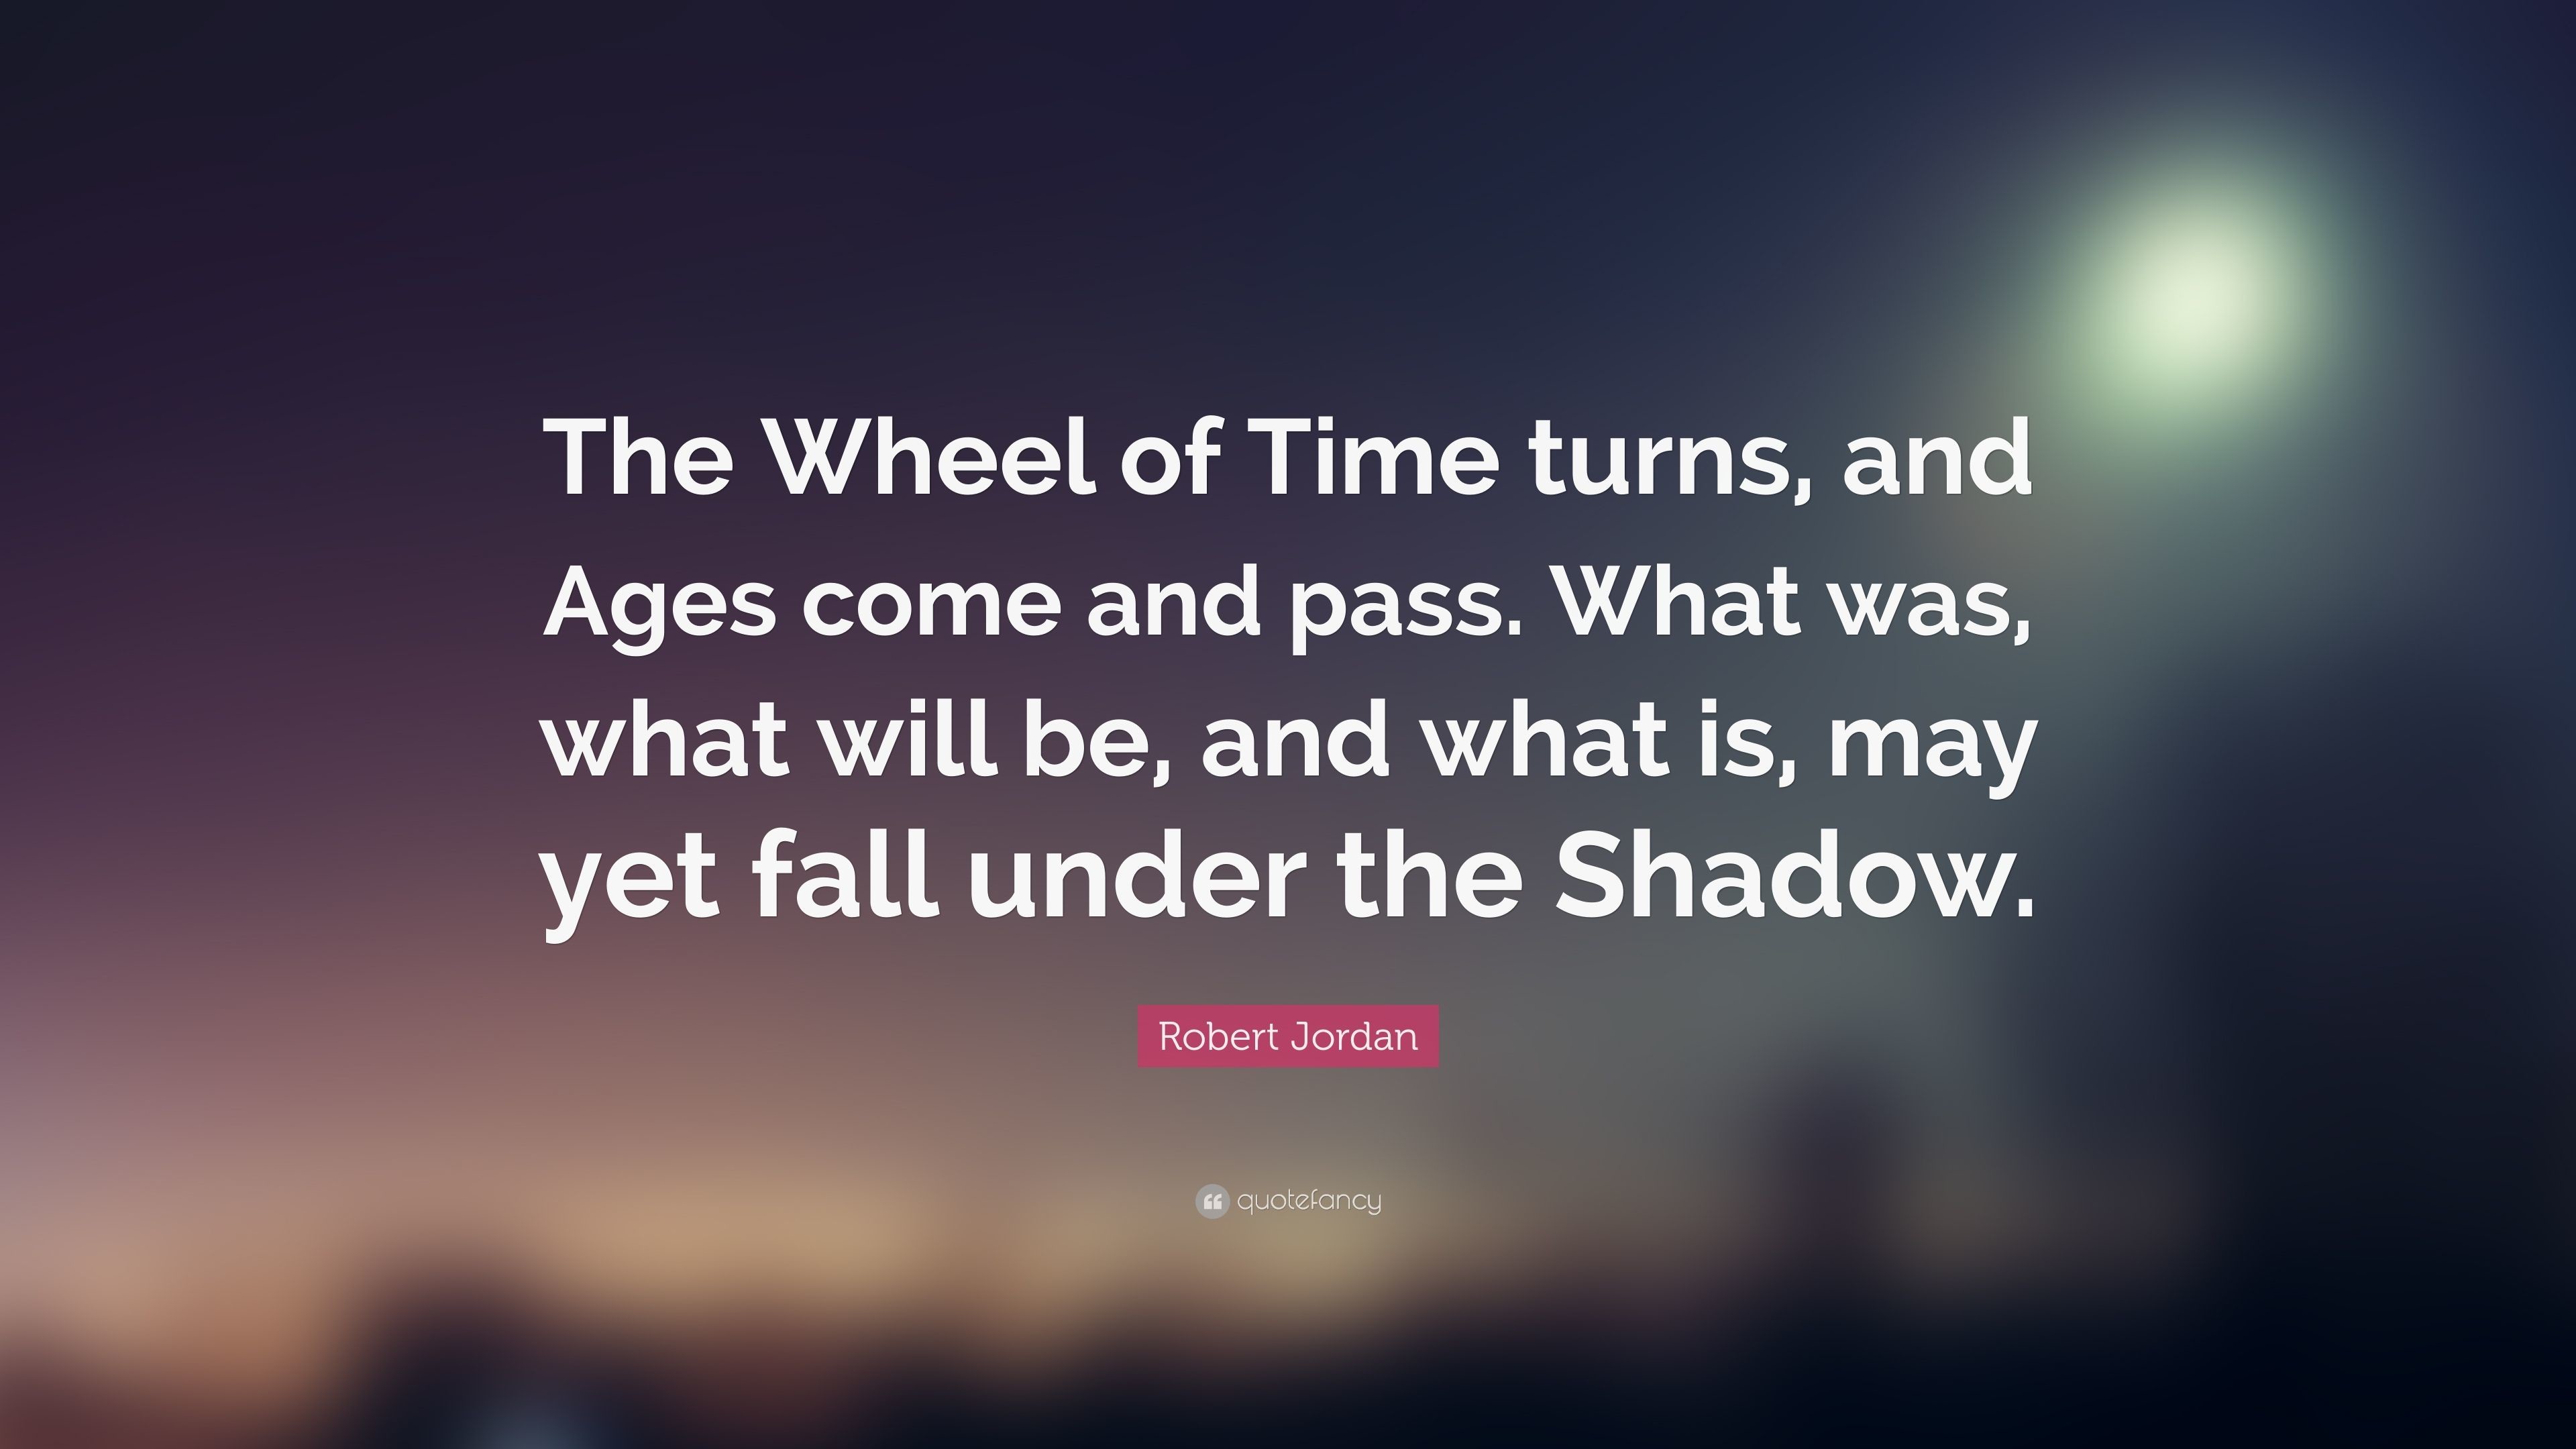 Robert Jordan Quote The Wheel of Time turns, and Ages come and pass